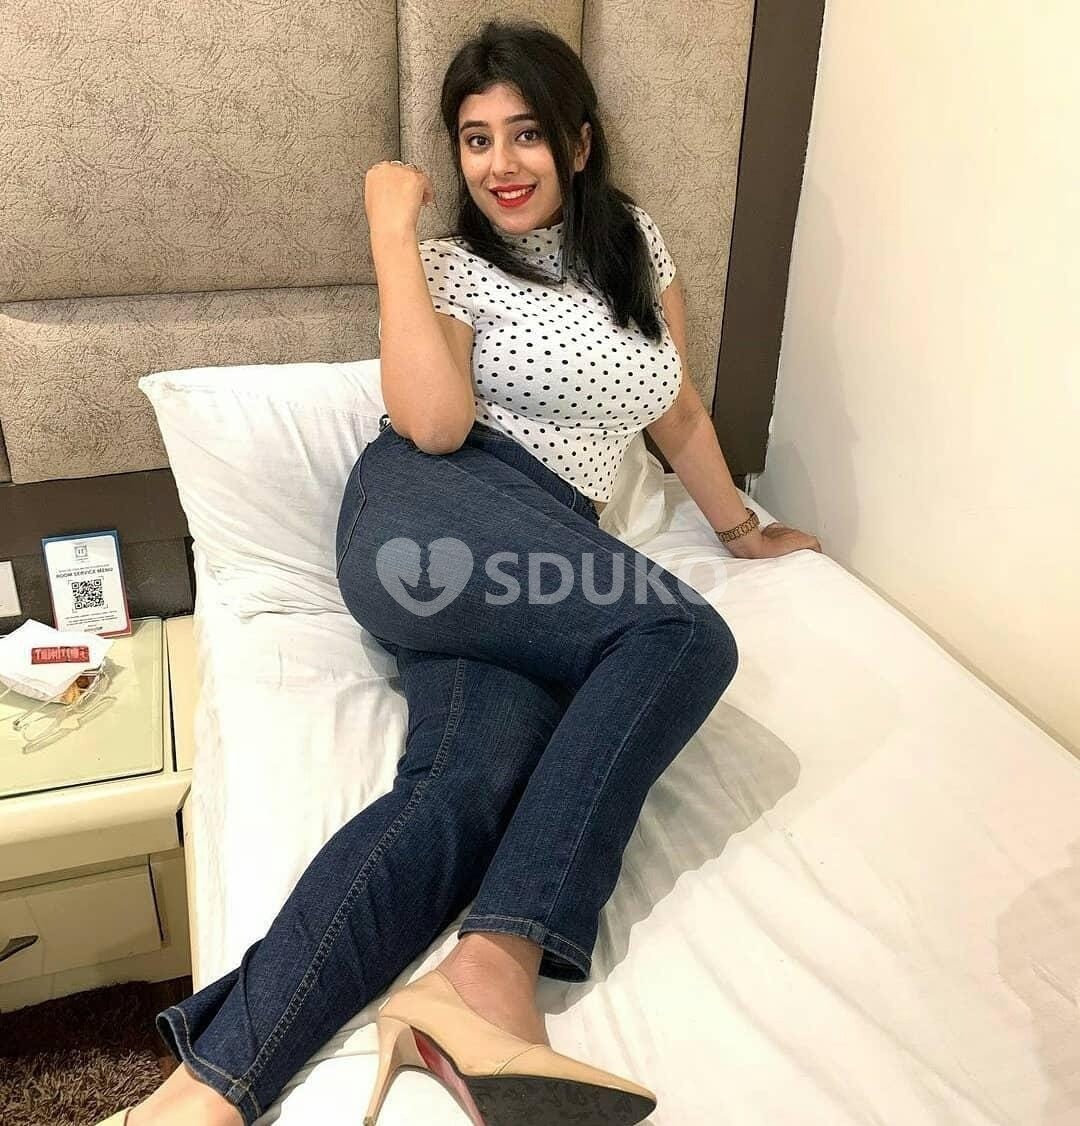 Rewari ⭐royal⭐genuine service Best VIP Independent Safe and Secure Hotel and Home Service at Low Price Call Me